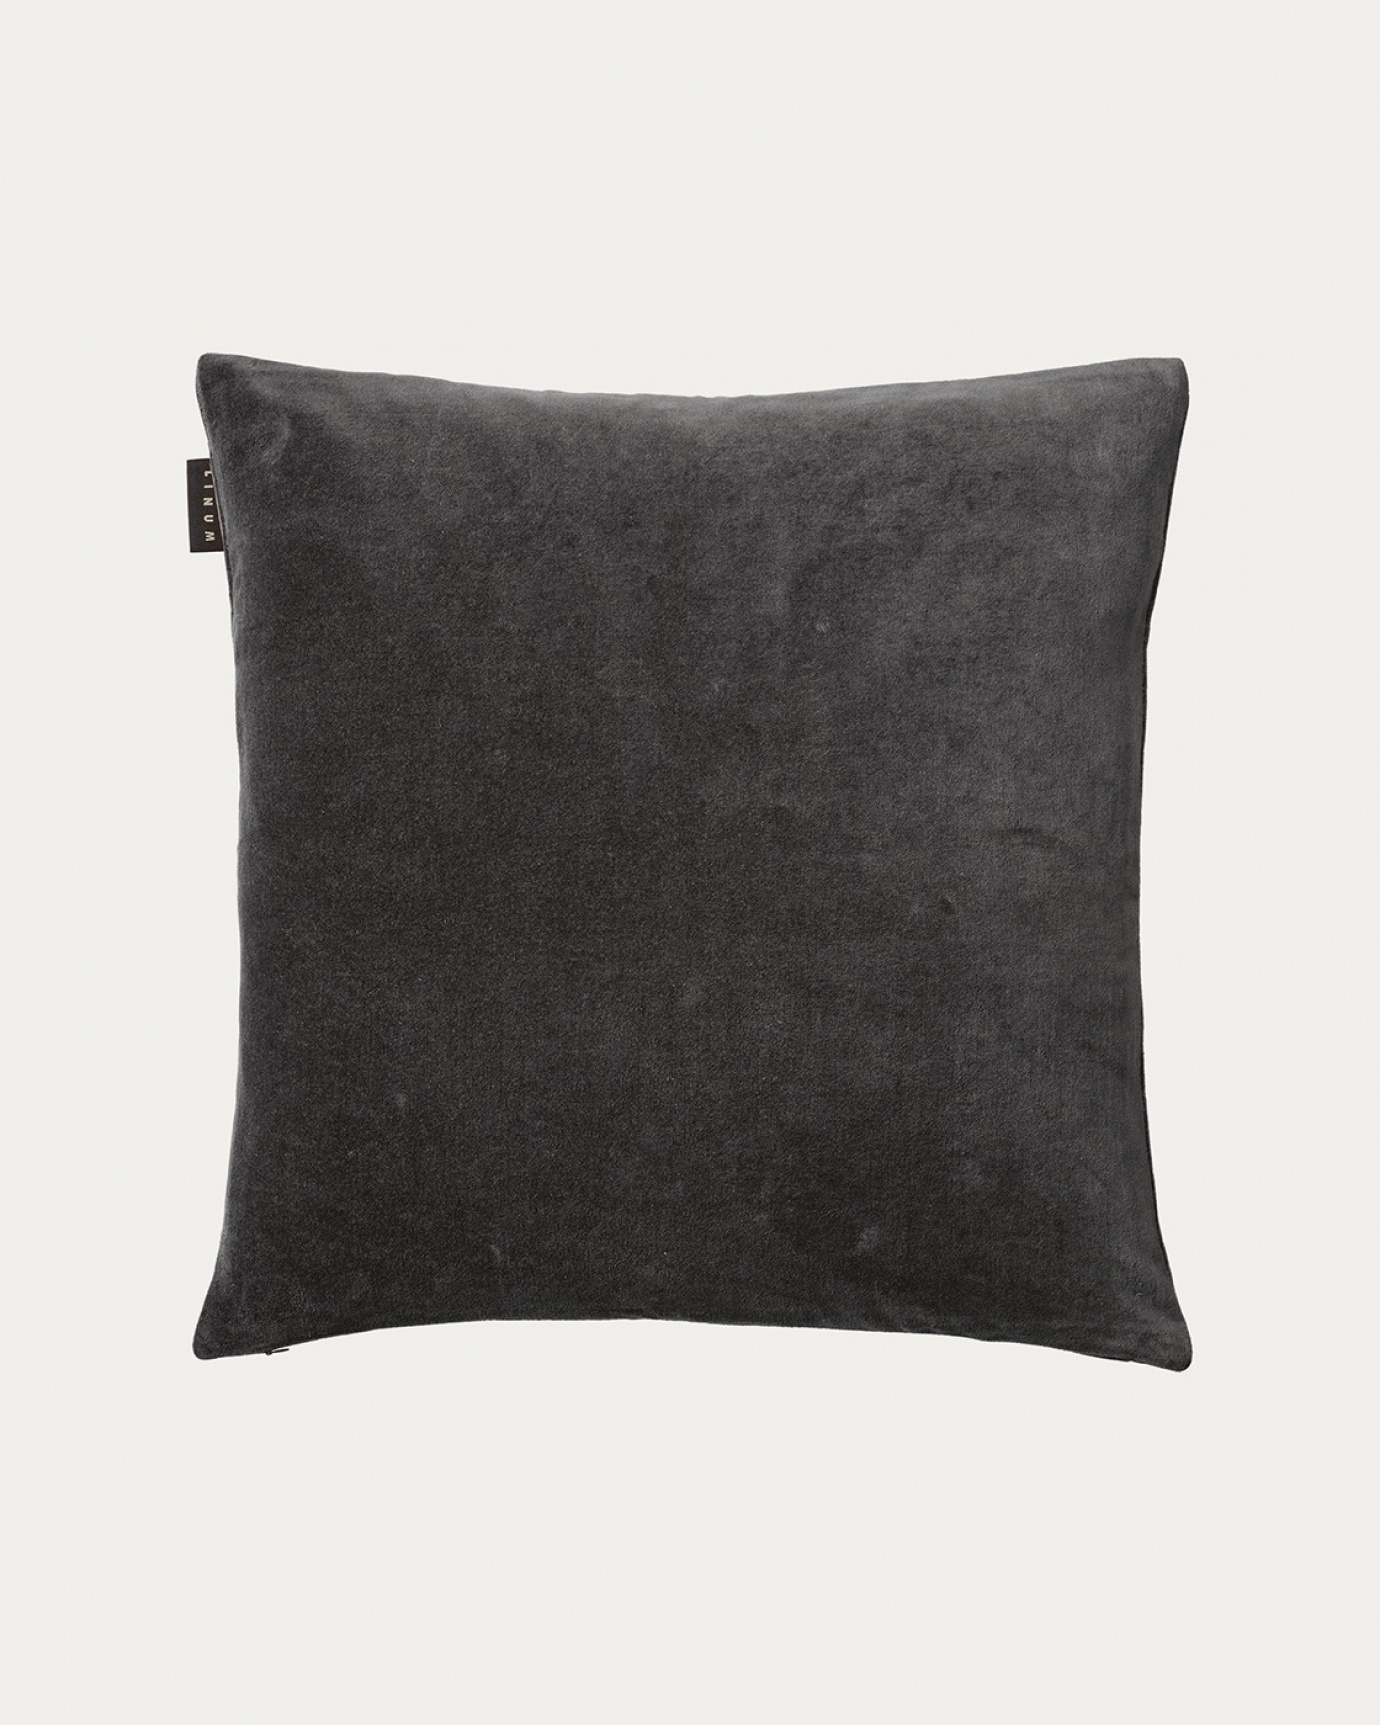 Product image dark charcoal grey PAOLO cushion cover in soft cotton velvet from LINUM DESIGN. Size 50x50 cm.